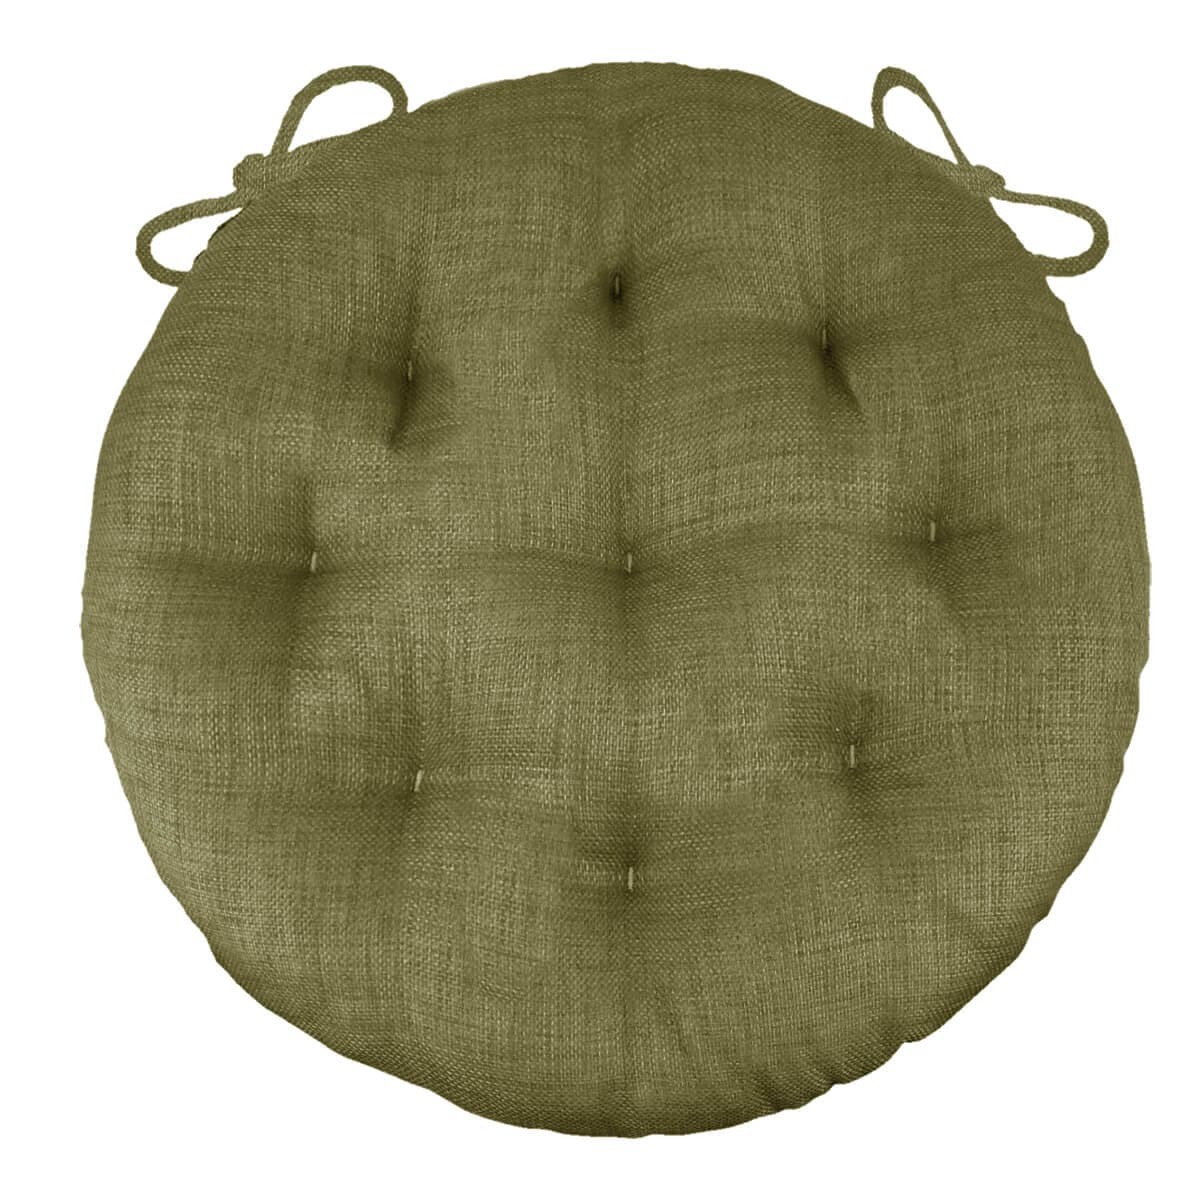 Rave Sage Green Bistro Chair Pad - 16" Round Cushion with Ties -Barnett Home Decor - Indoor/Outdoor